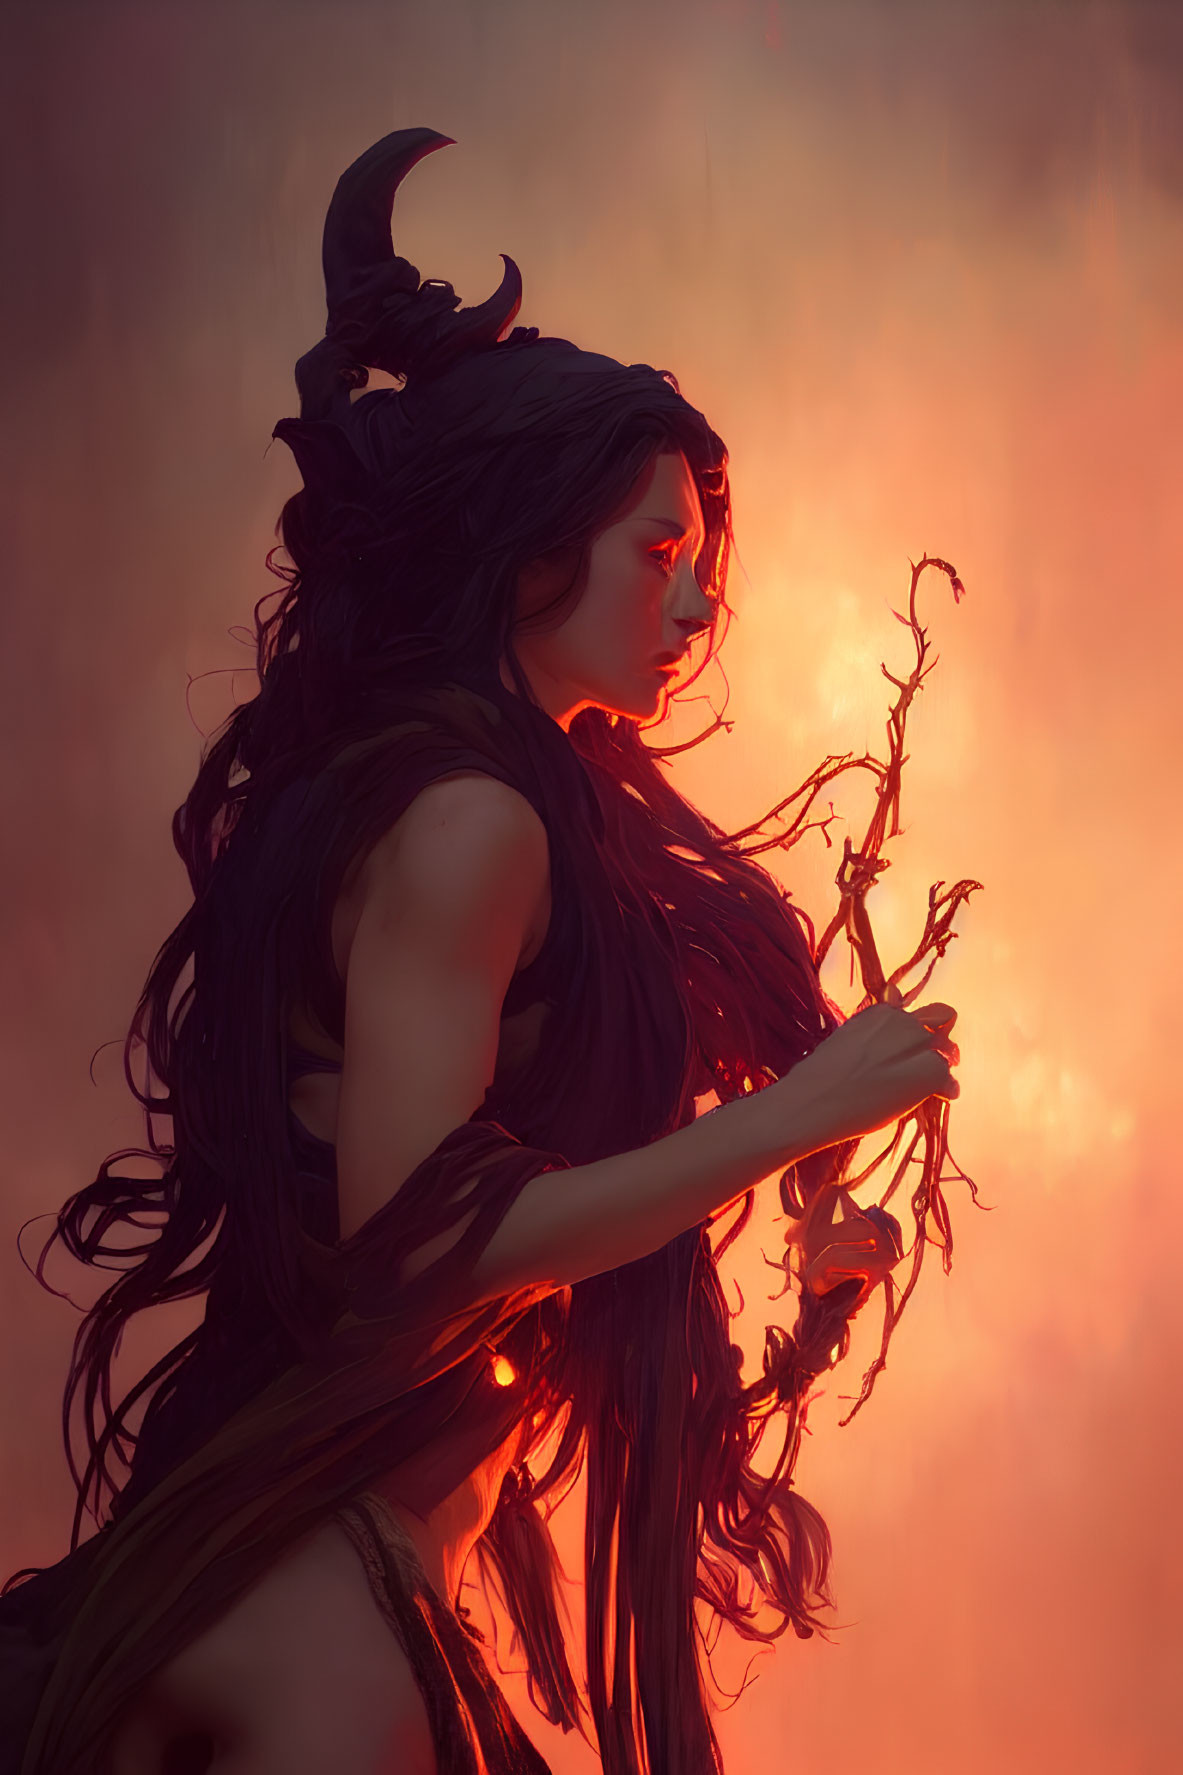 Mystical female figure with horns holding glowing branch in fiery backdrop